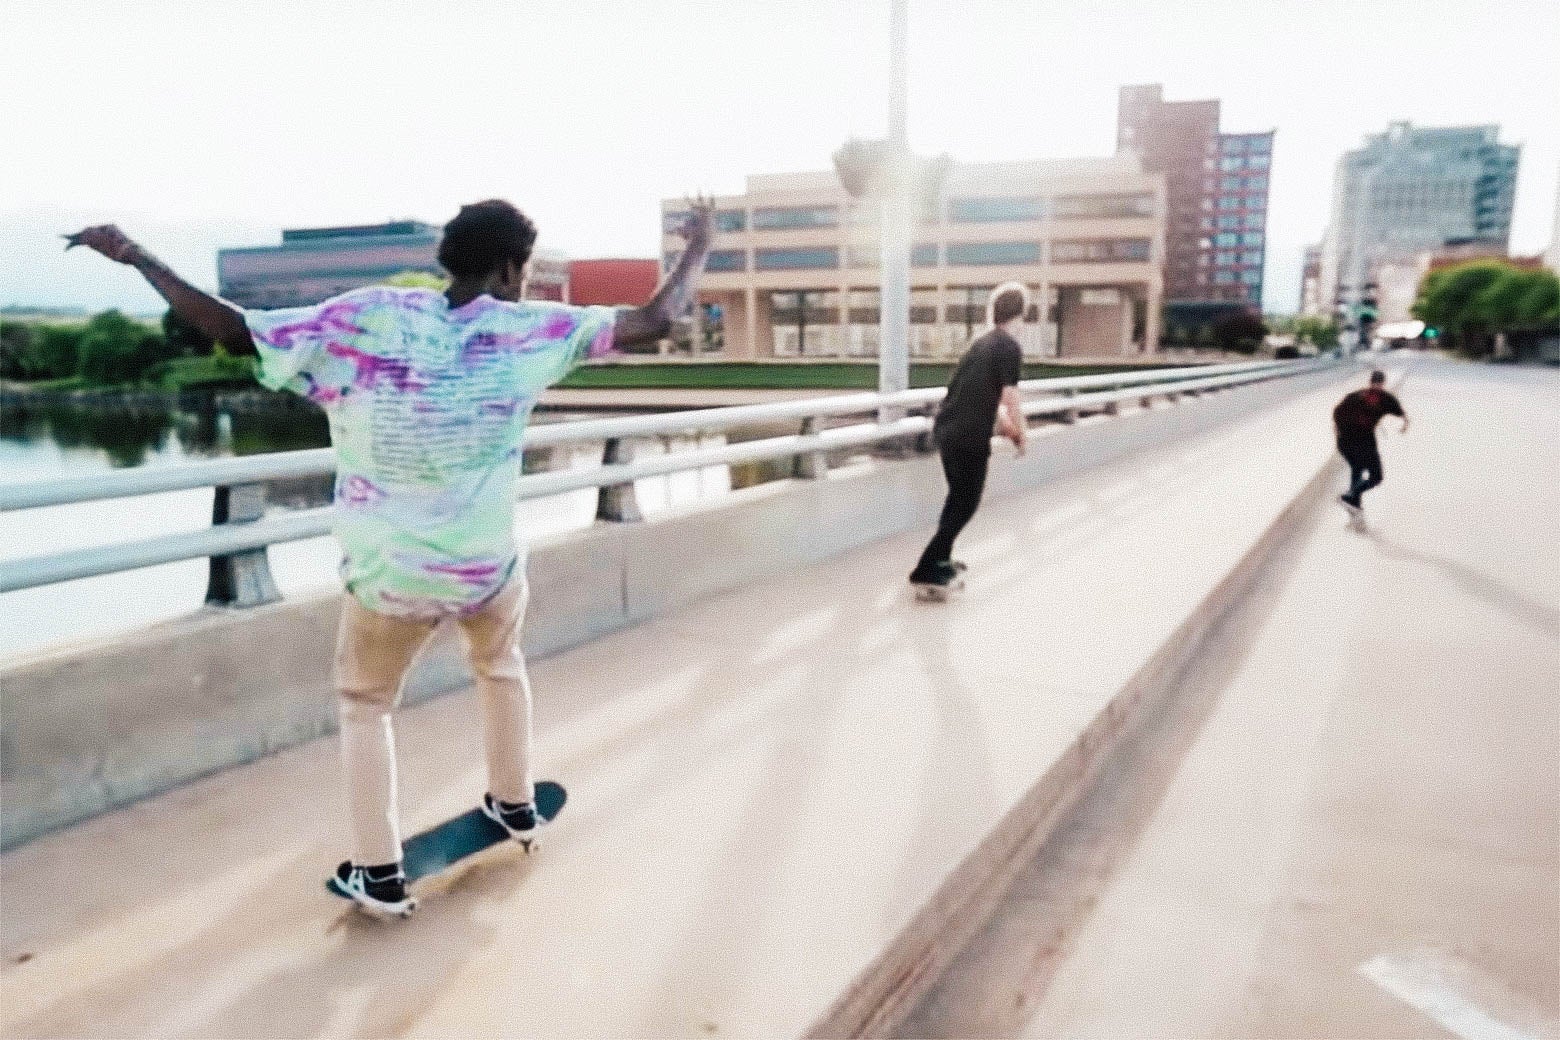 Three skateboarders skate across a bridge, away from the camera, from Minding the Gap.